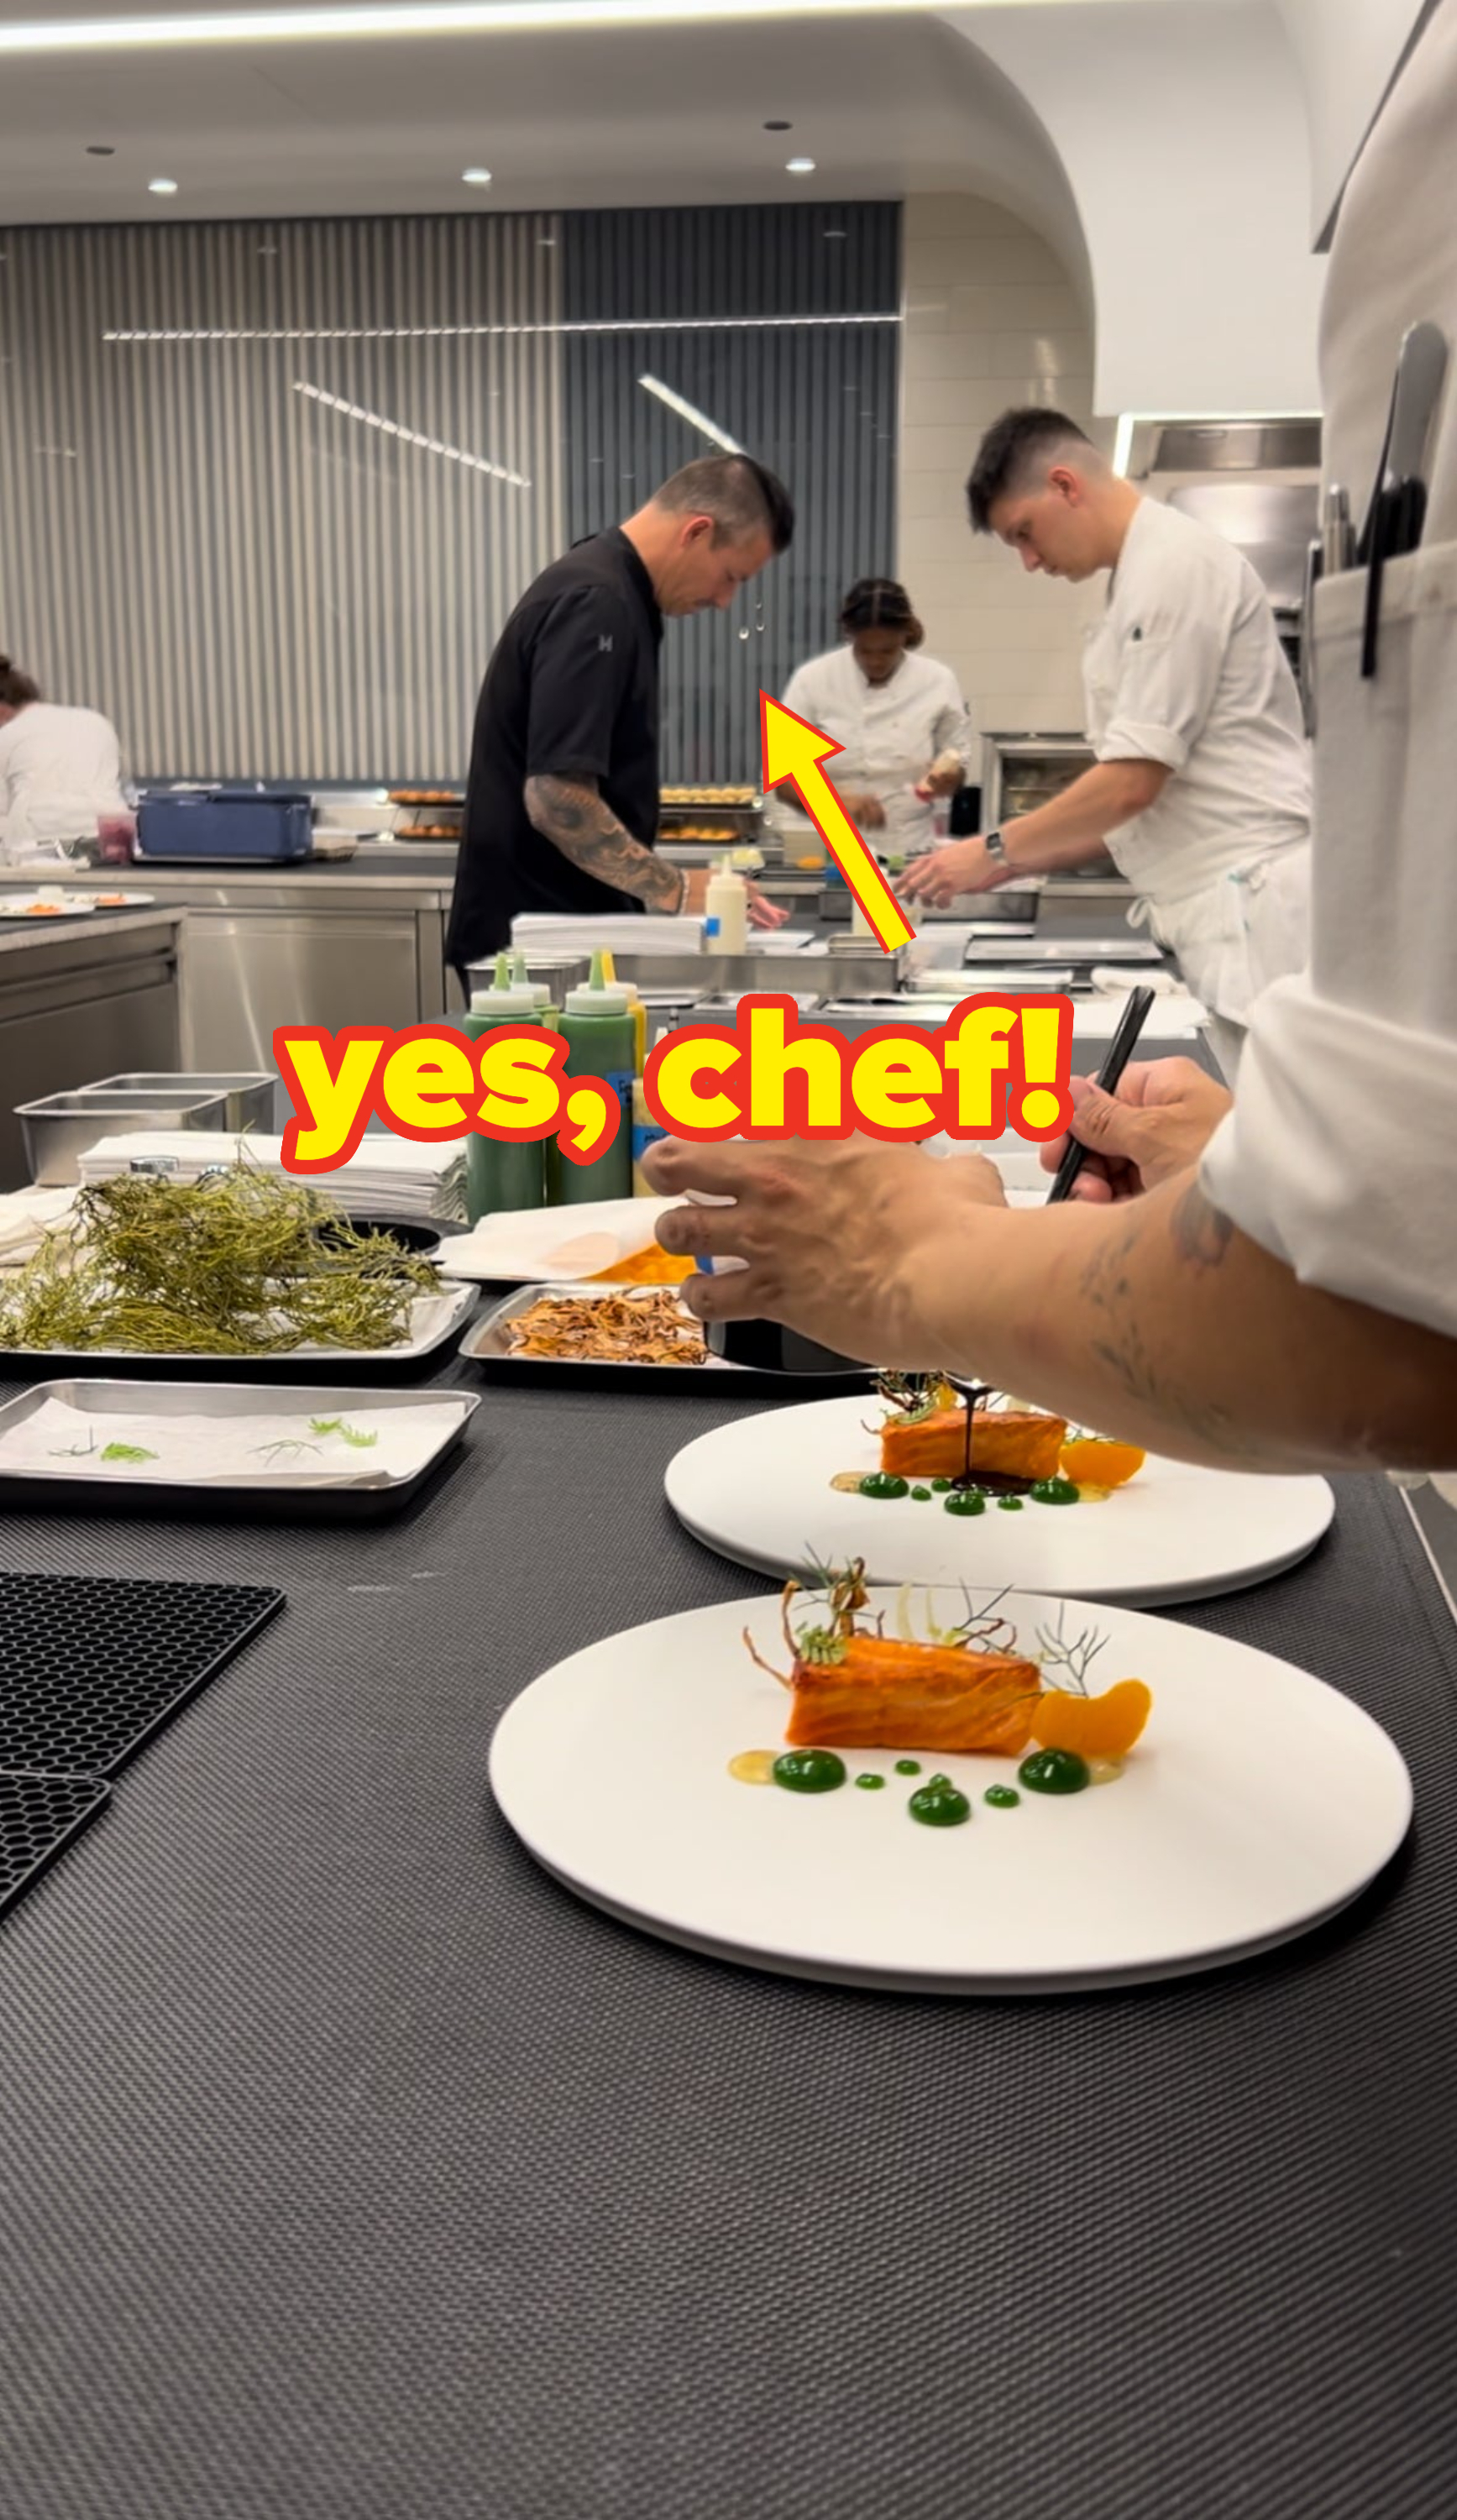 Chefs prepare and plate gourmet dishes in a professional kitchen, focusing on precision and presentation. Multiple plates with intricate designs are seen